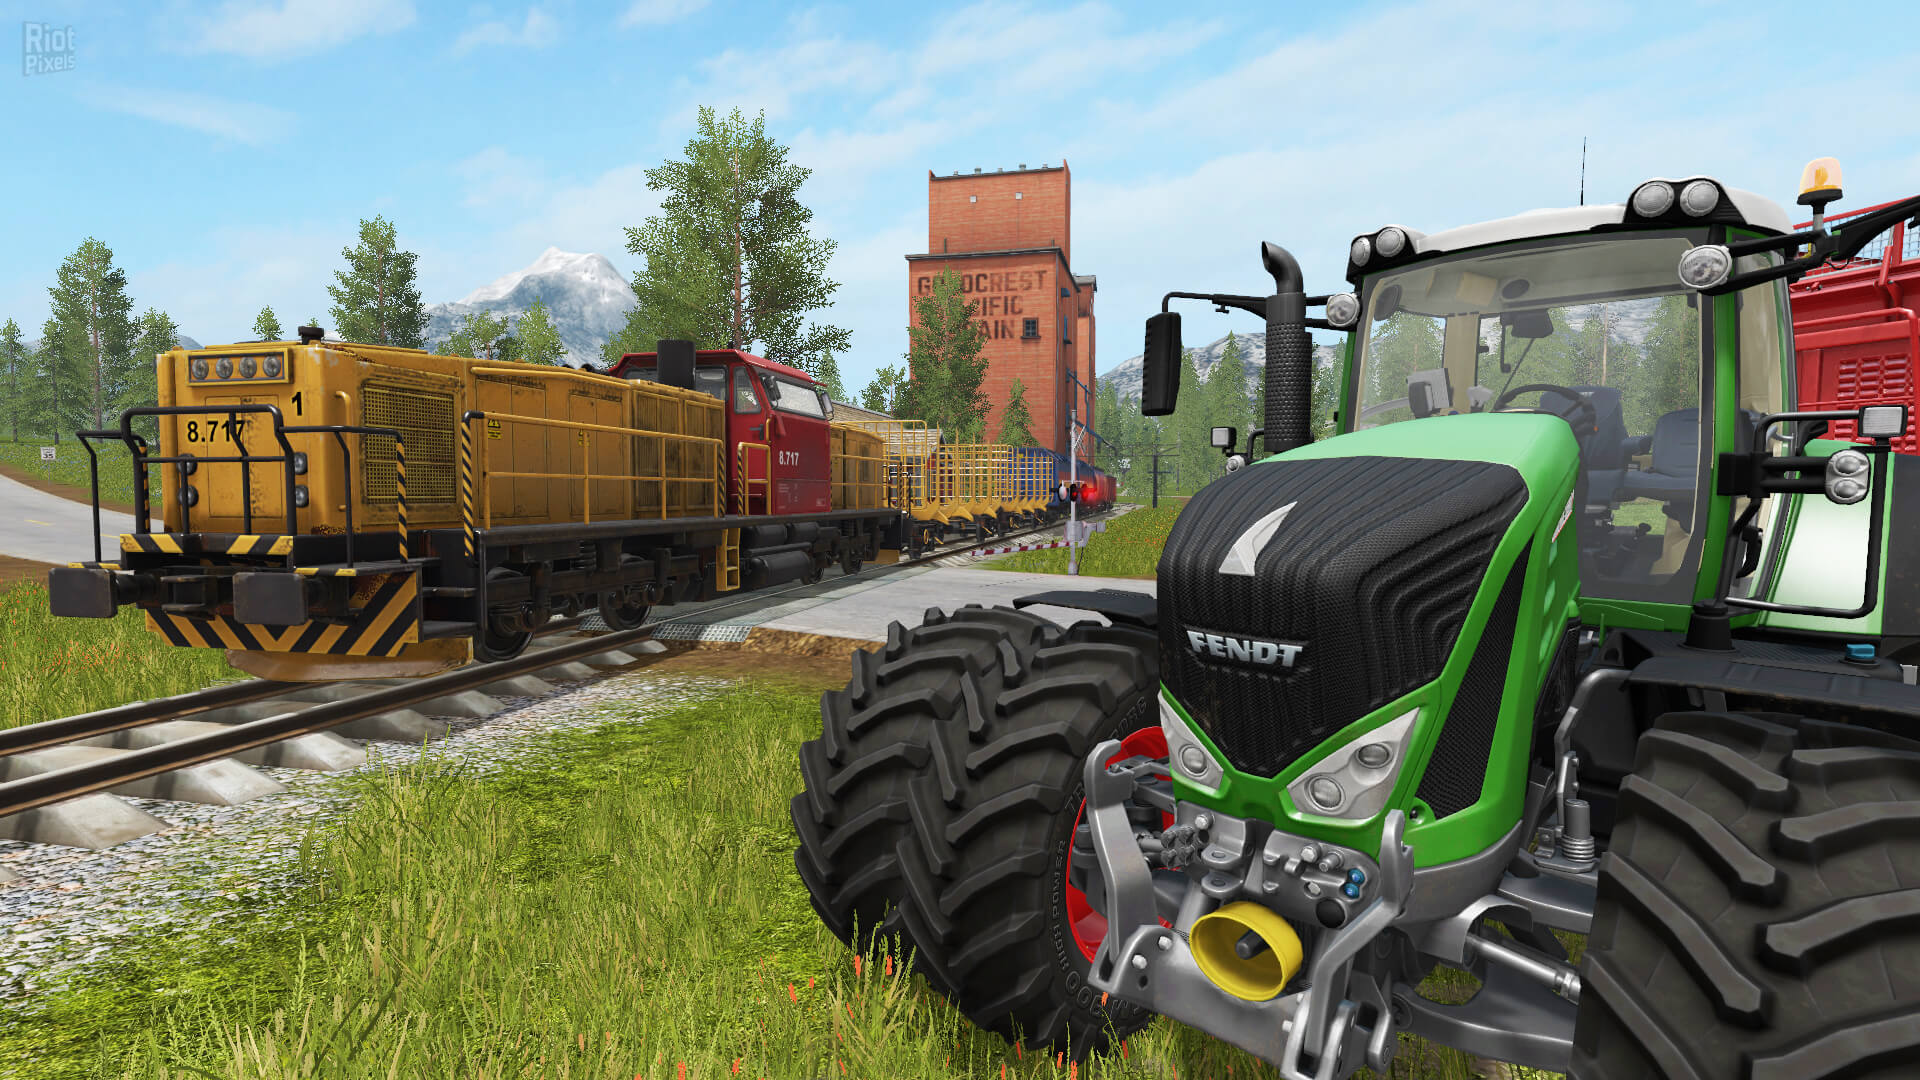 Download Farming Simulator 17 Full Game Highly Compressed For PC - TraX Gaming Center